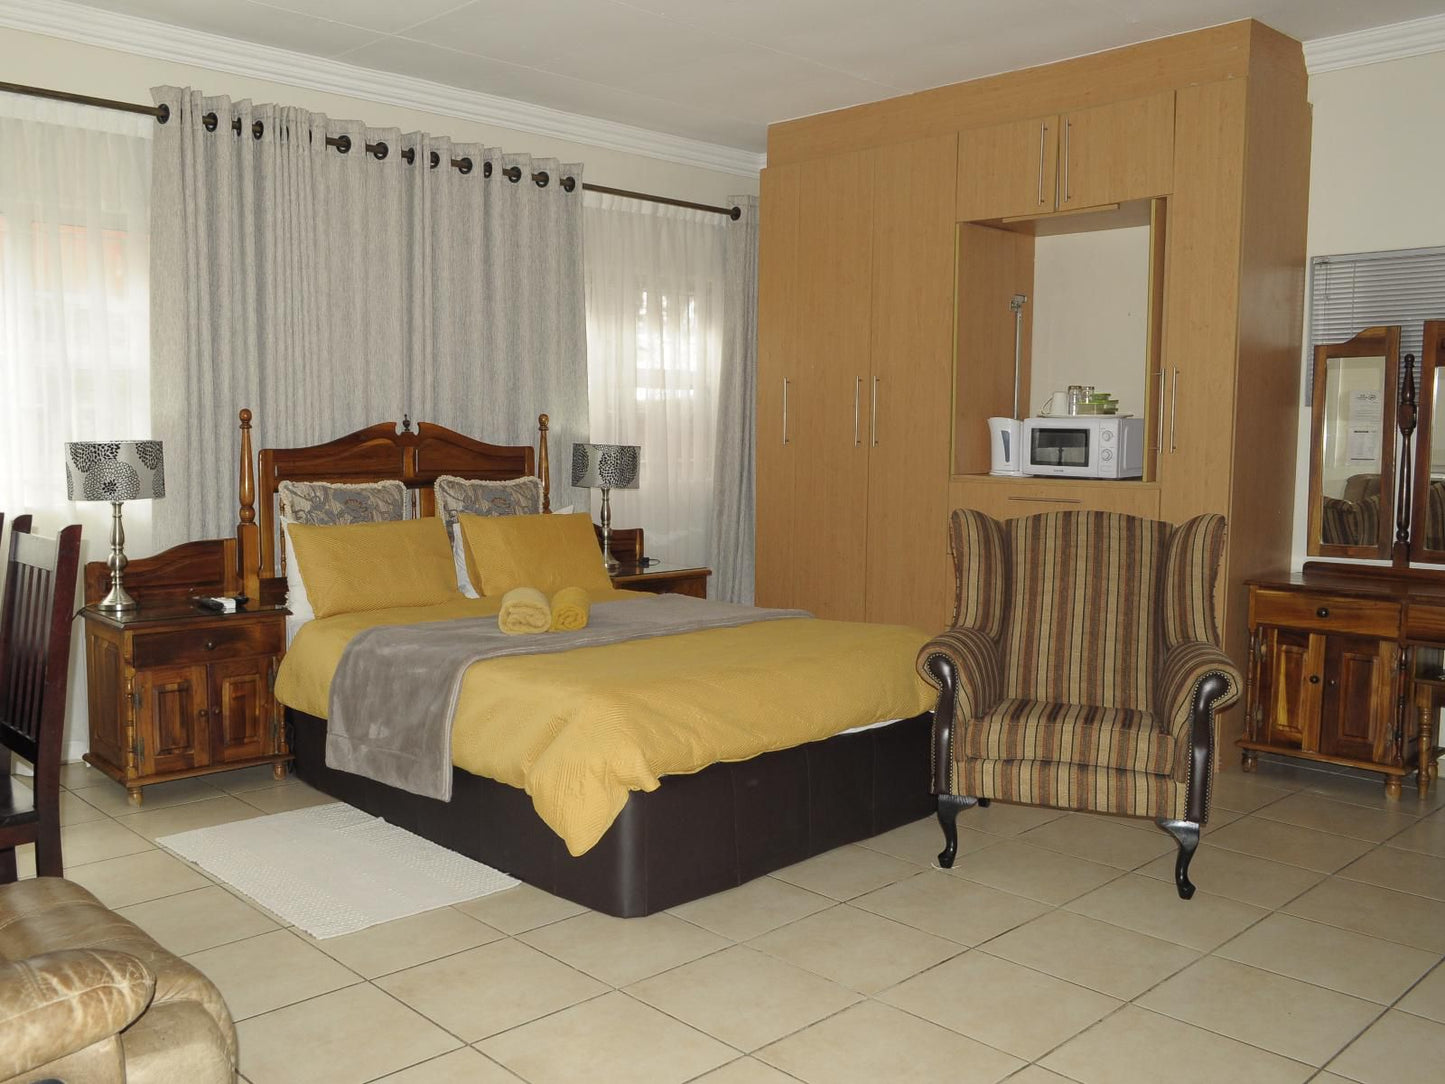 Home Guest House Protea Park Rustenburg North West Province South Africa Sepia Tones, Bedroom